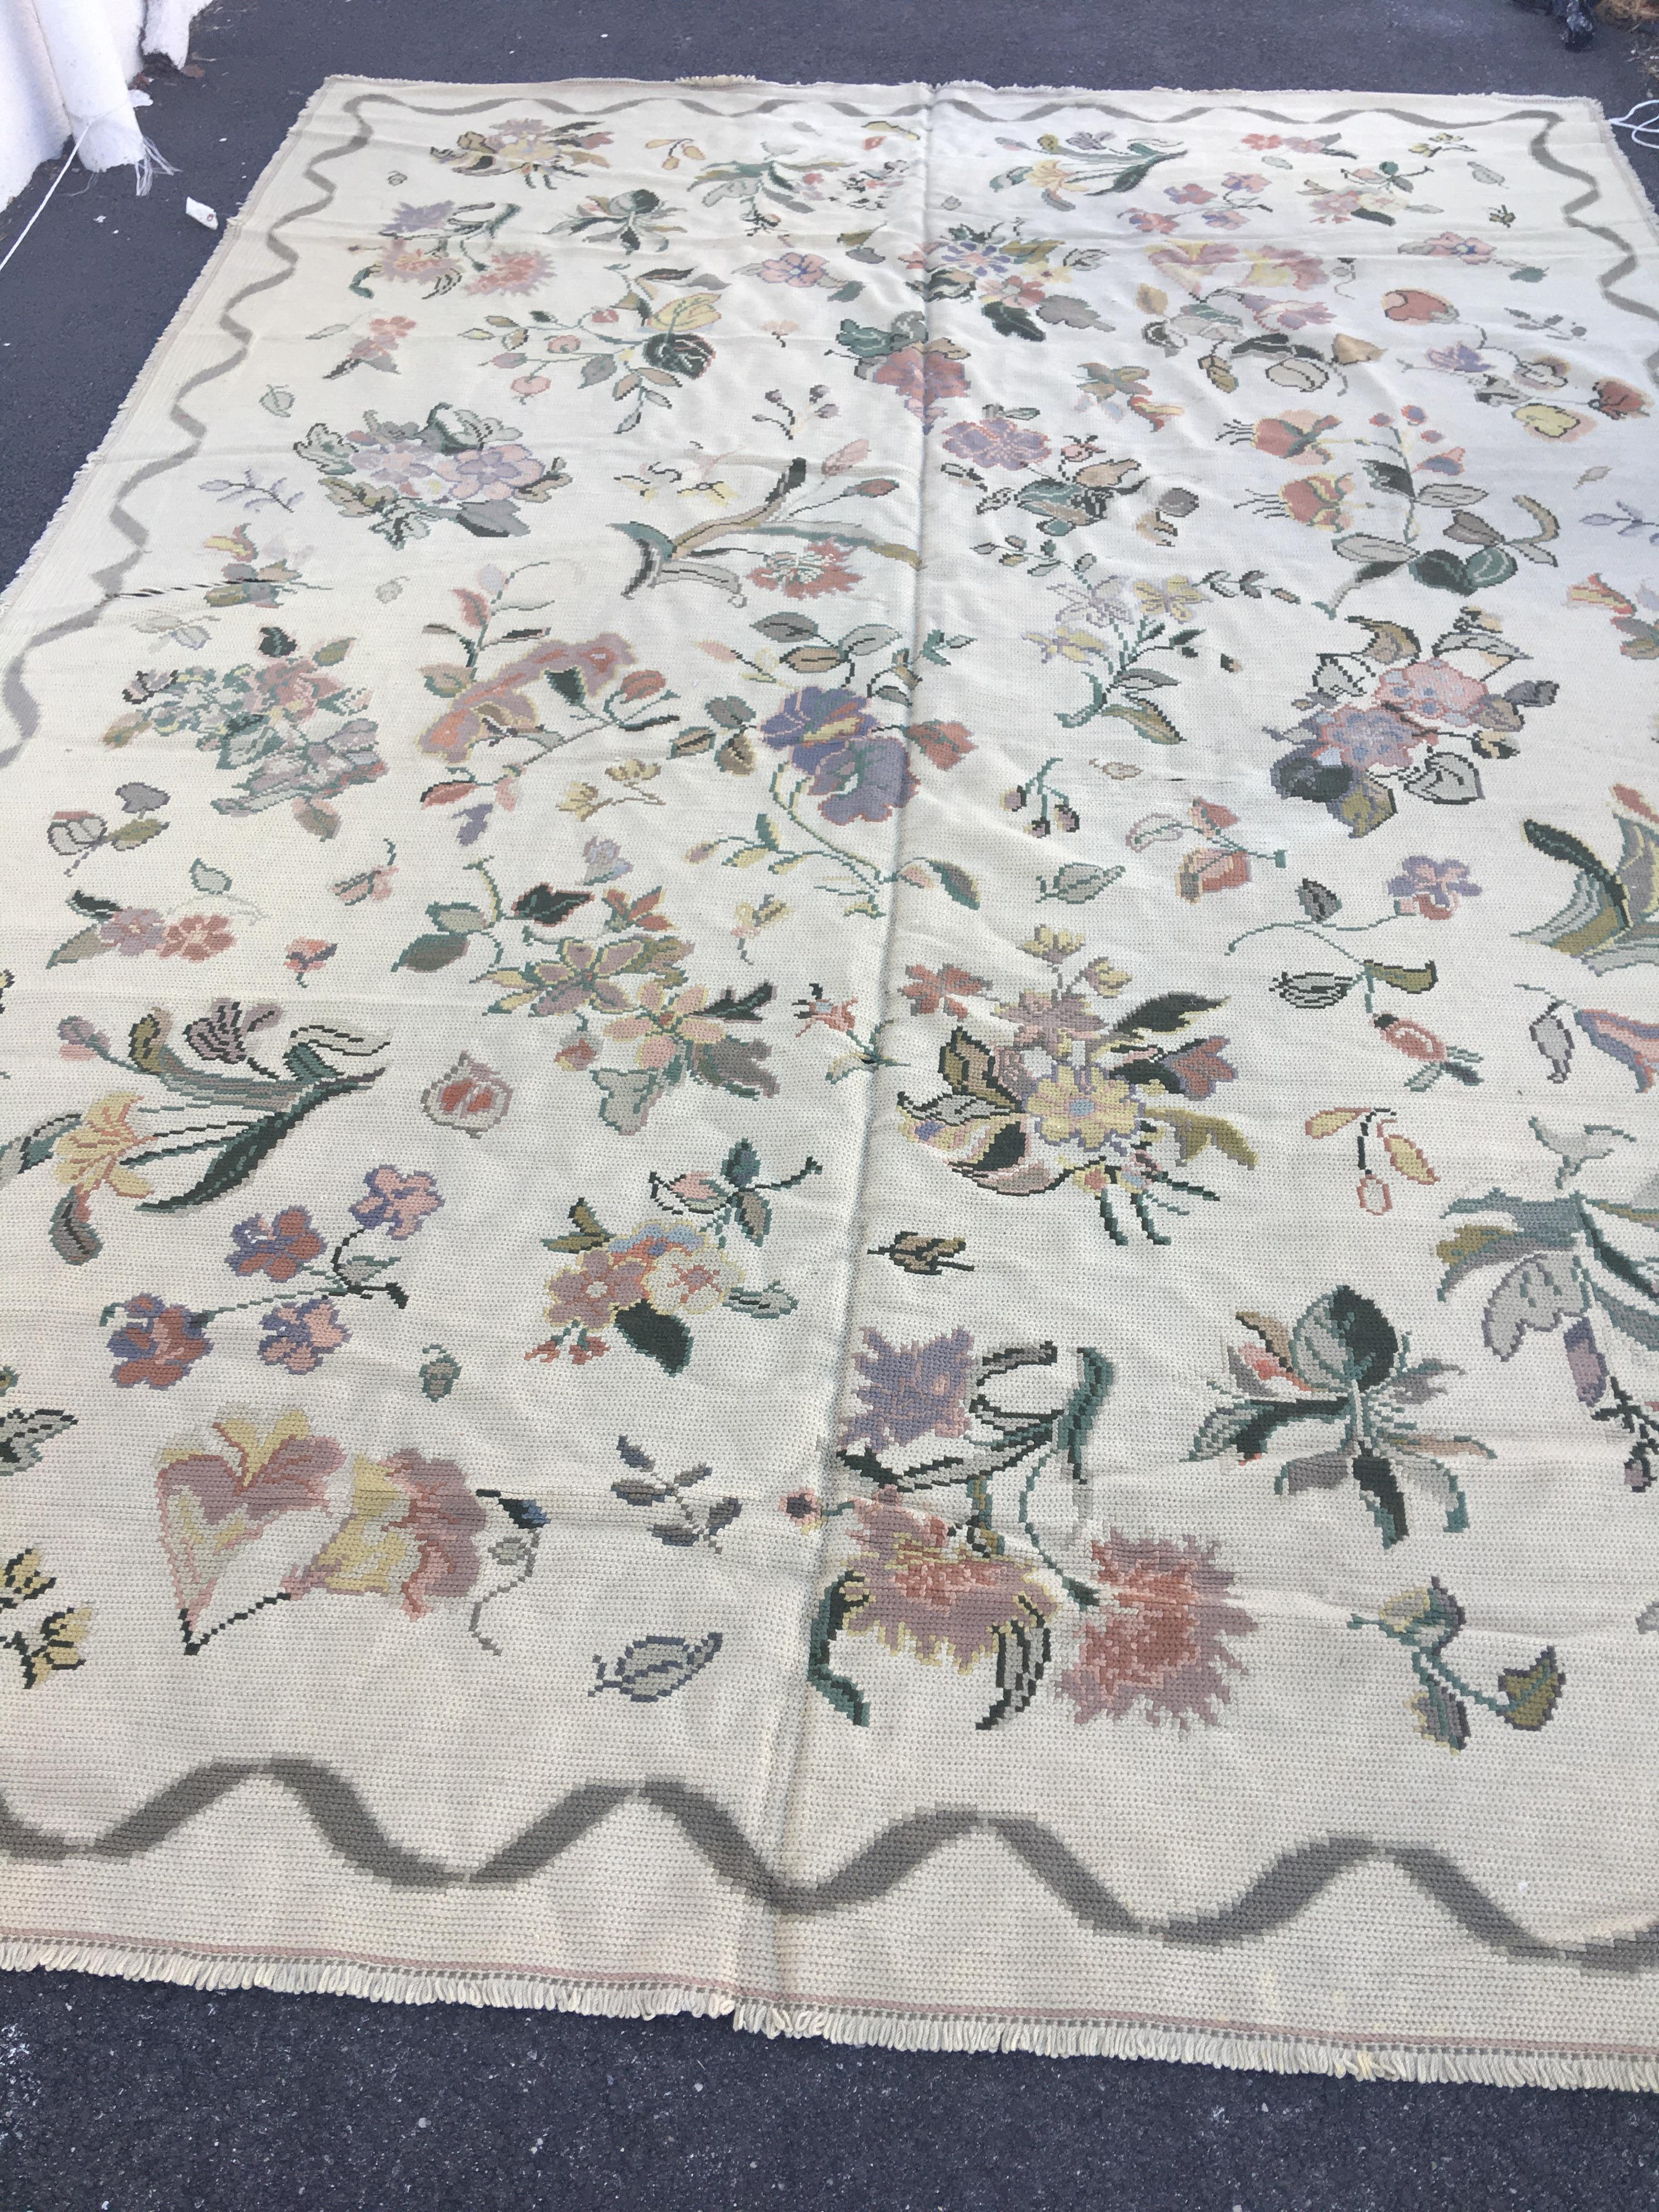 Antique Ivory Portuguese needlepoint with flowers, circa 1930-1940s. It measures: 8 x 11.8 ft.